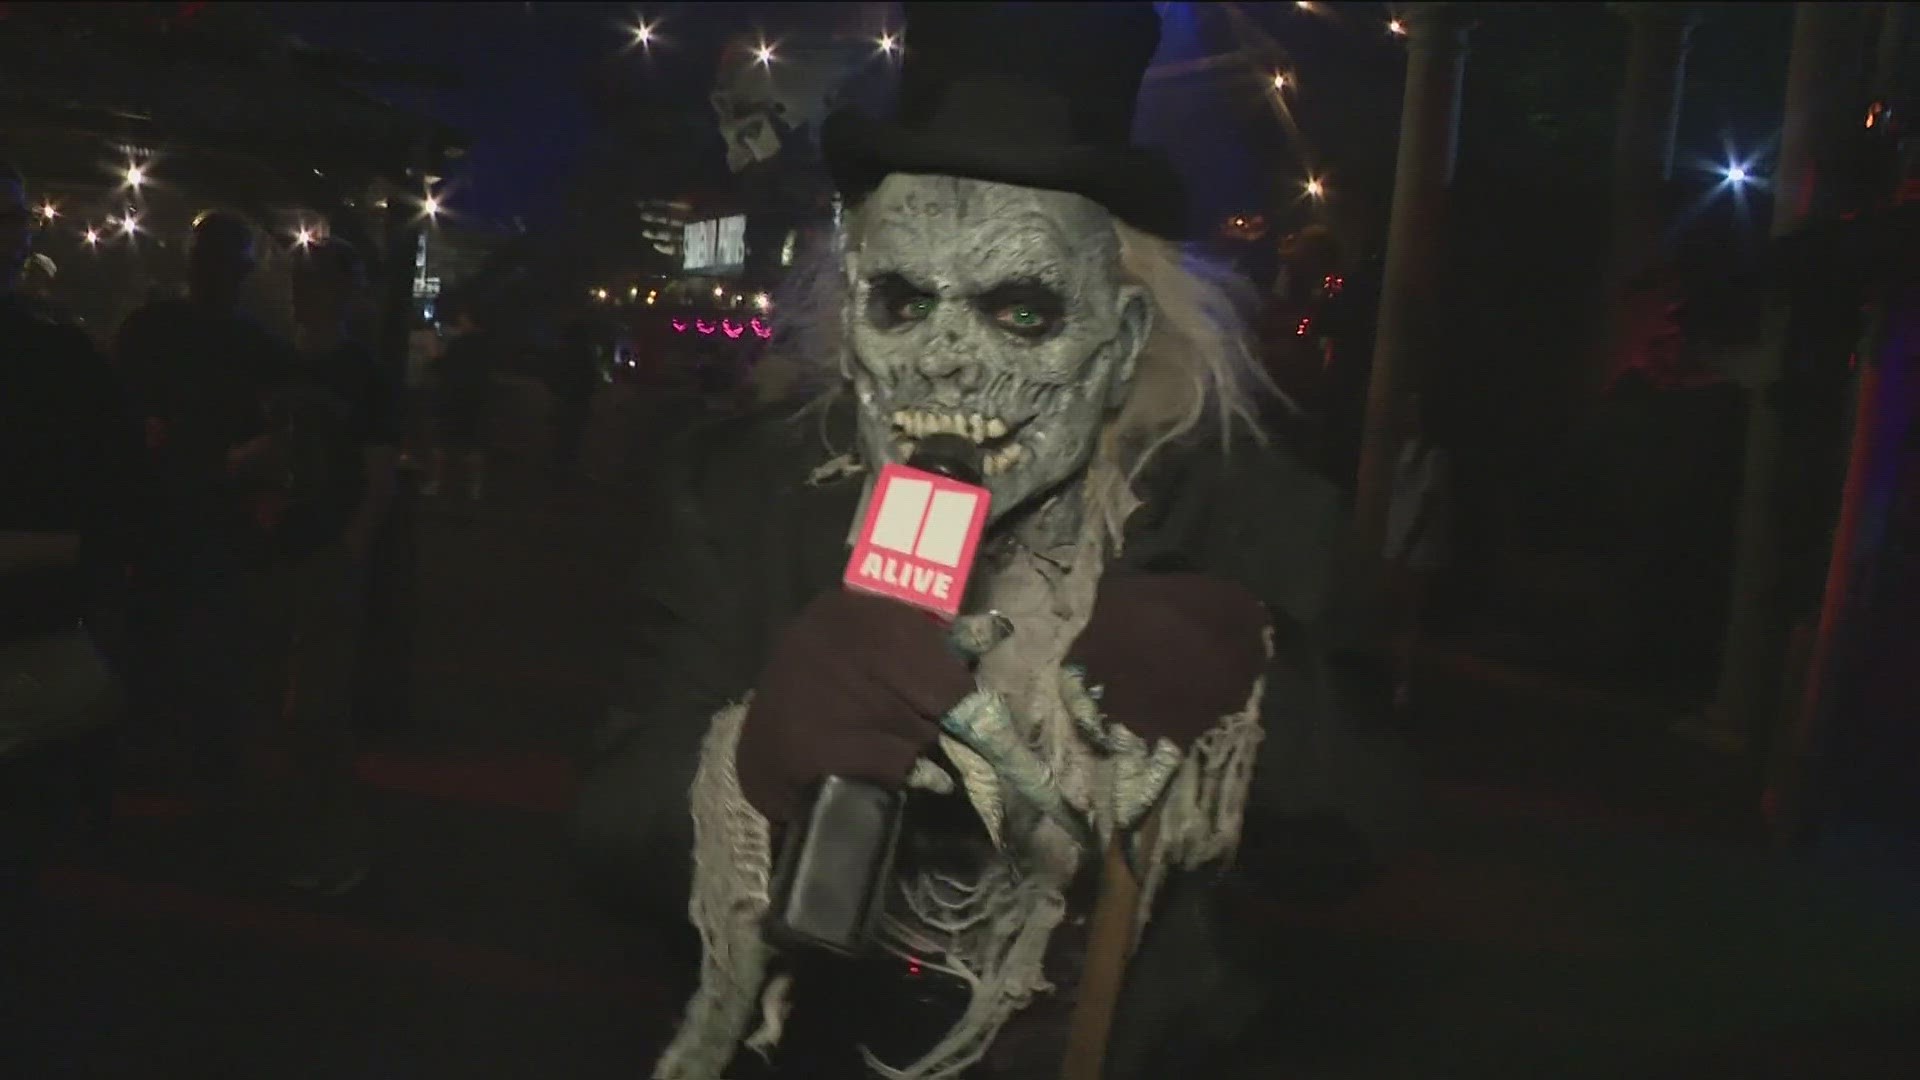 11Alive's Crash Clark hung out with a spooky group of ghouls at Netherworld.